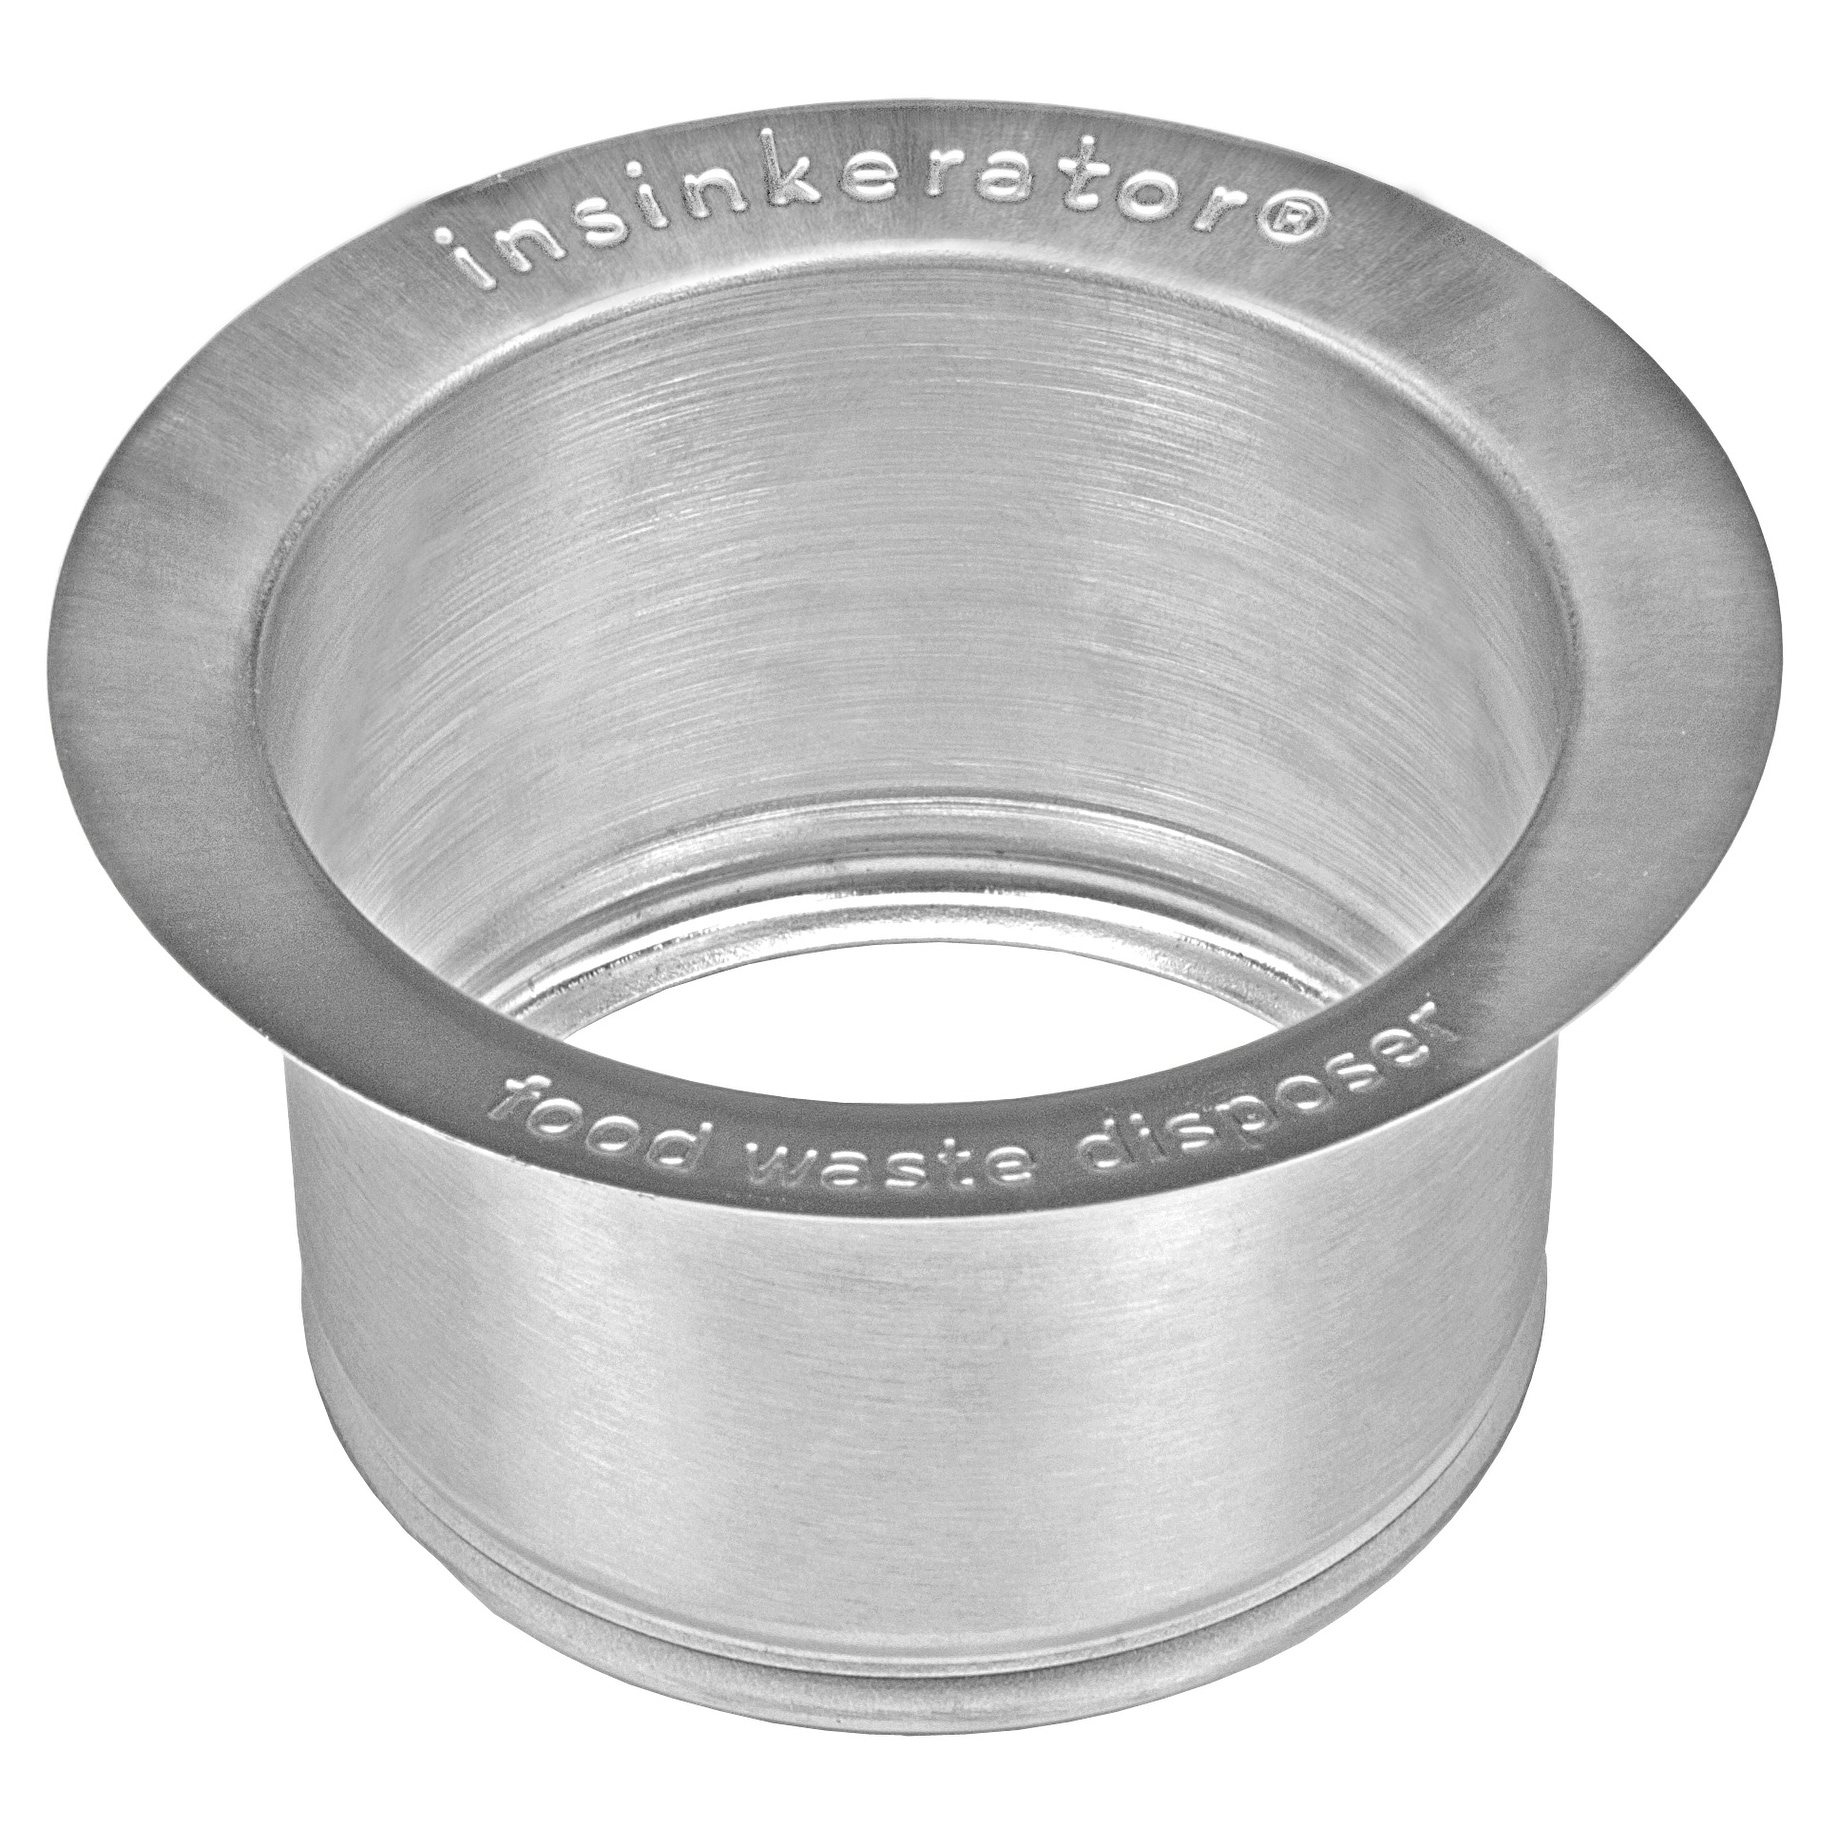 Ruvati Extended Garbage Disposal Flange with Deep Basket Strainer for  Kitchen Sinks - Stainless Steel - RVA1049ST - Ruvati USA